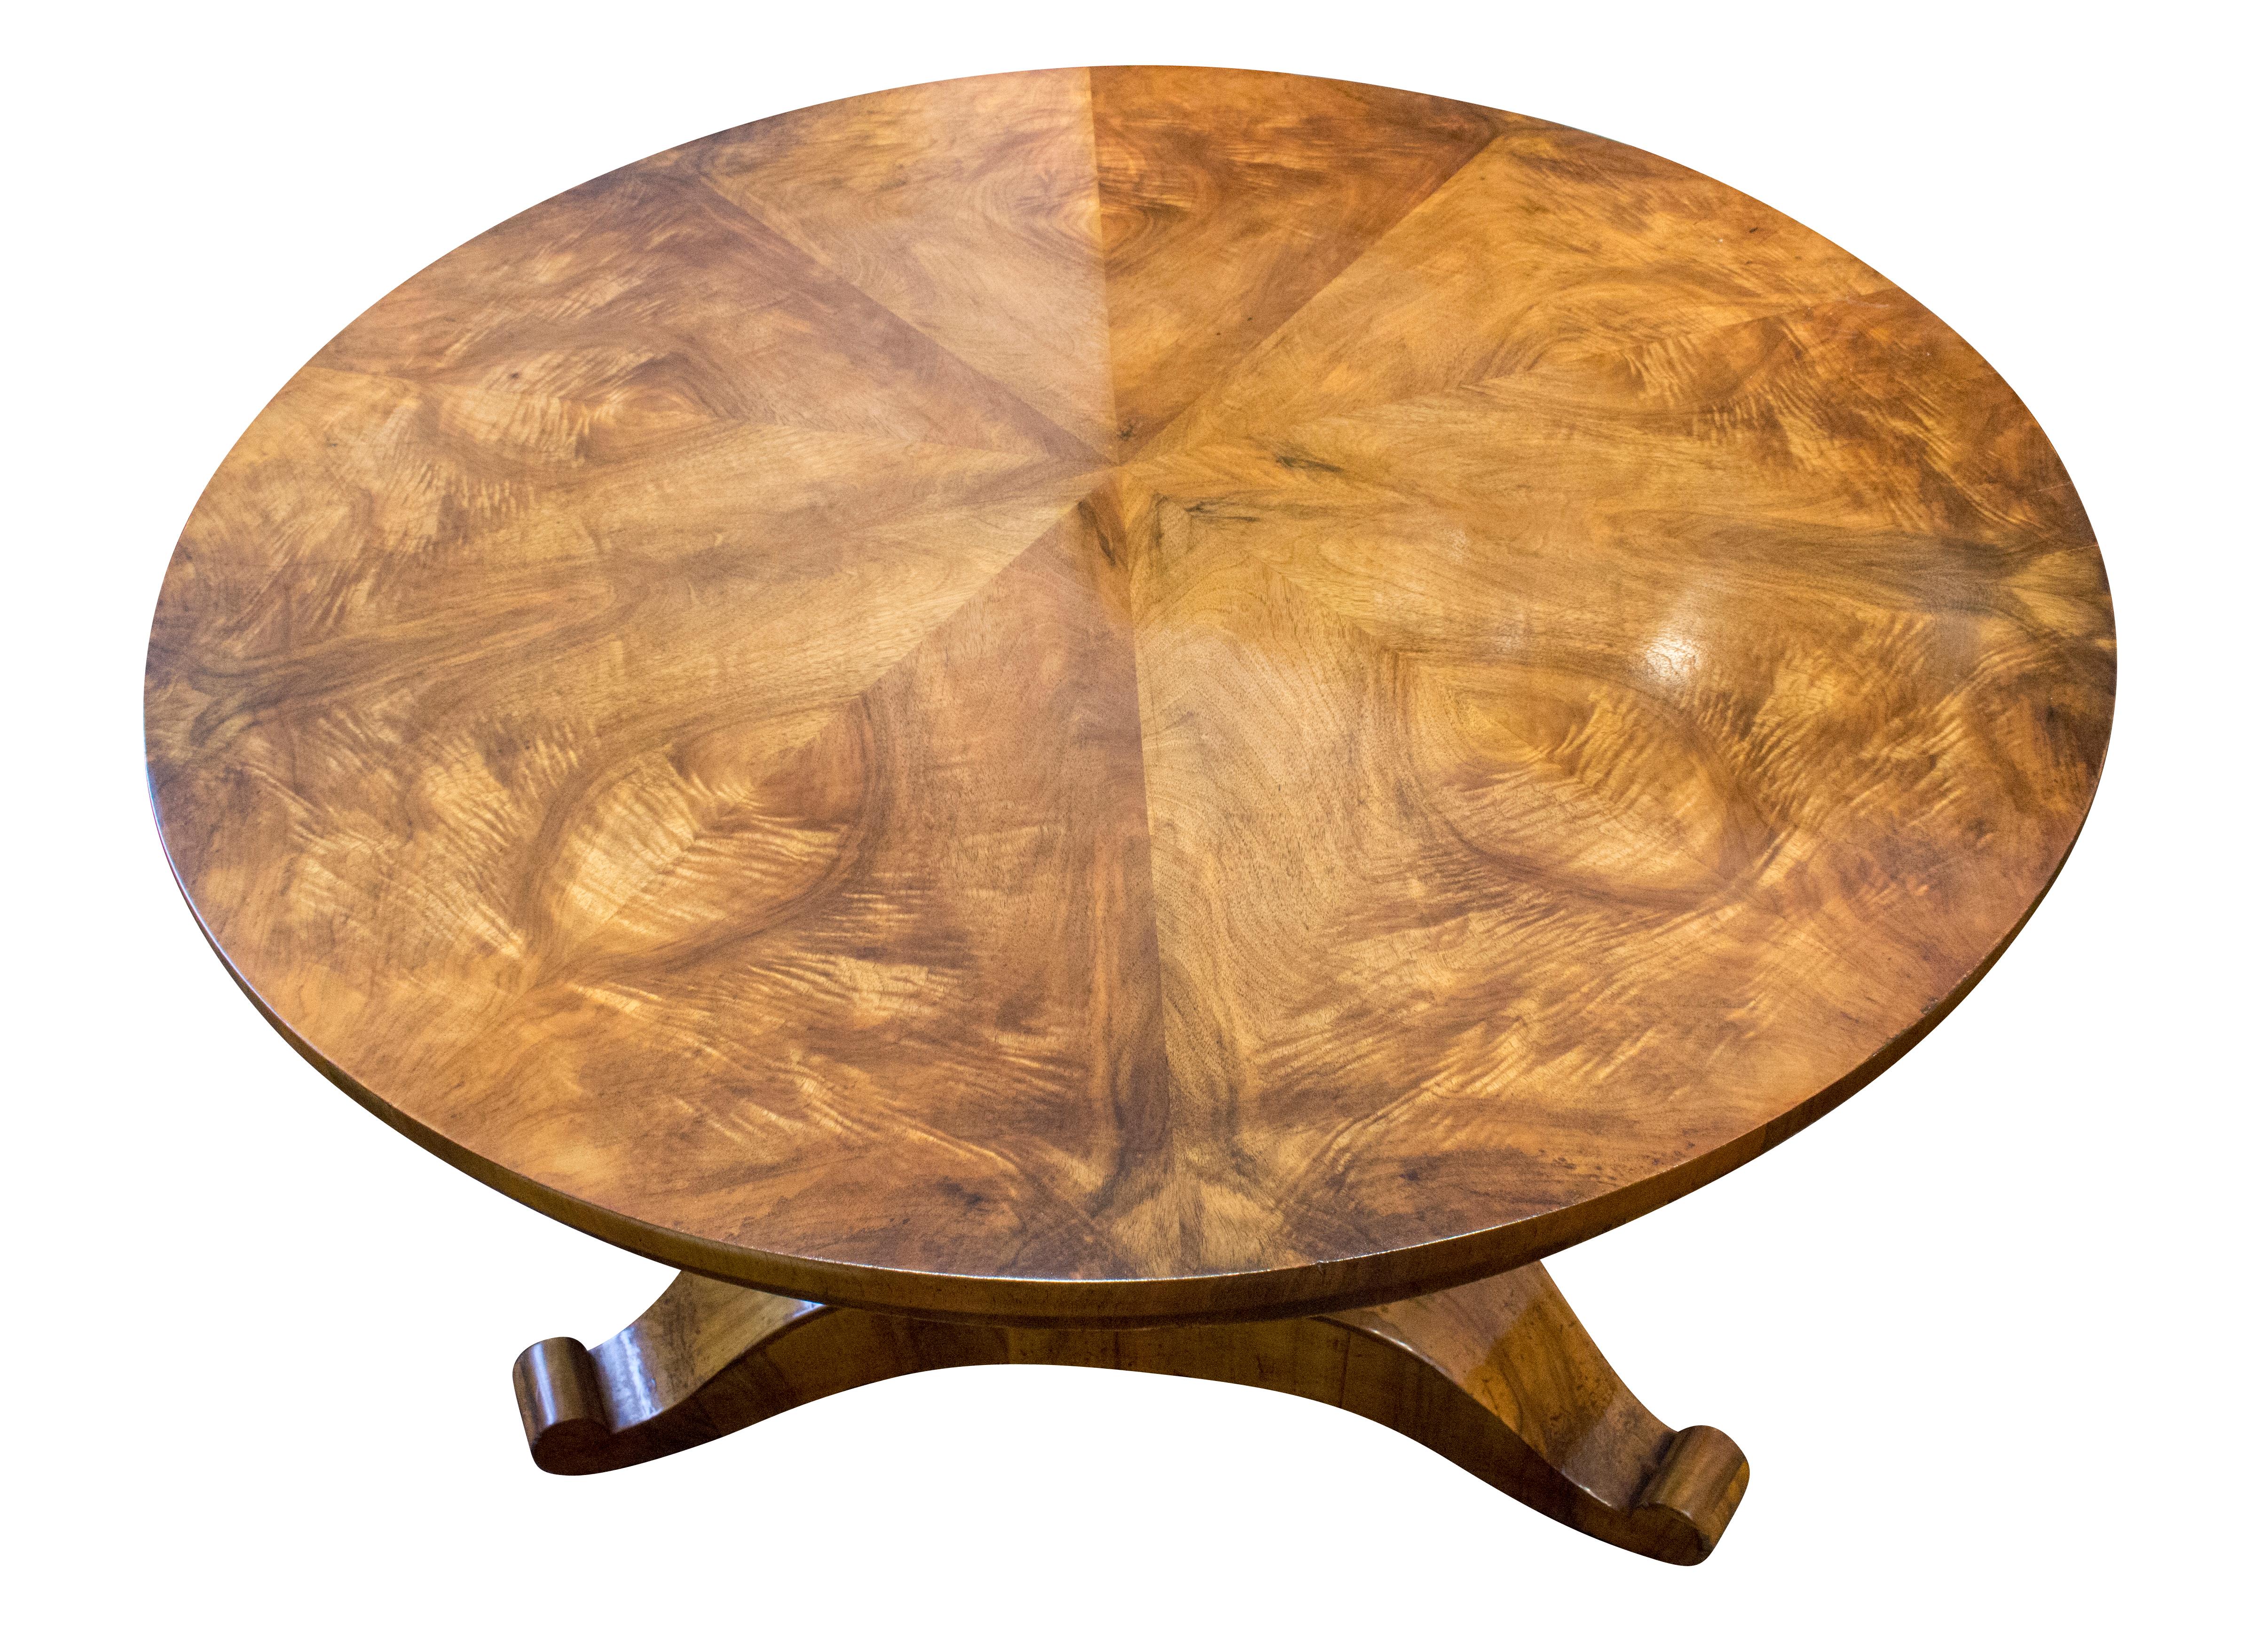 Beautiful Biedermeier center table. The table is made of walnut veneer on a pinewood body. The table is in a very good restored condition.